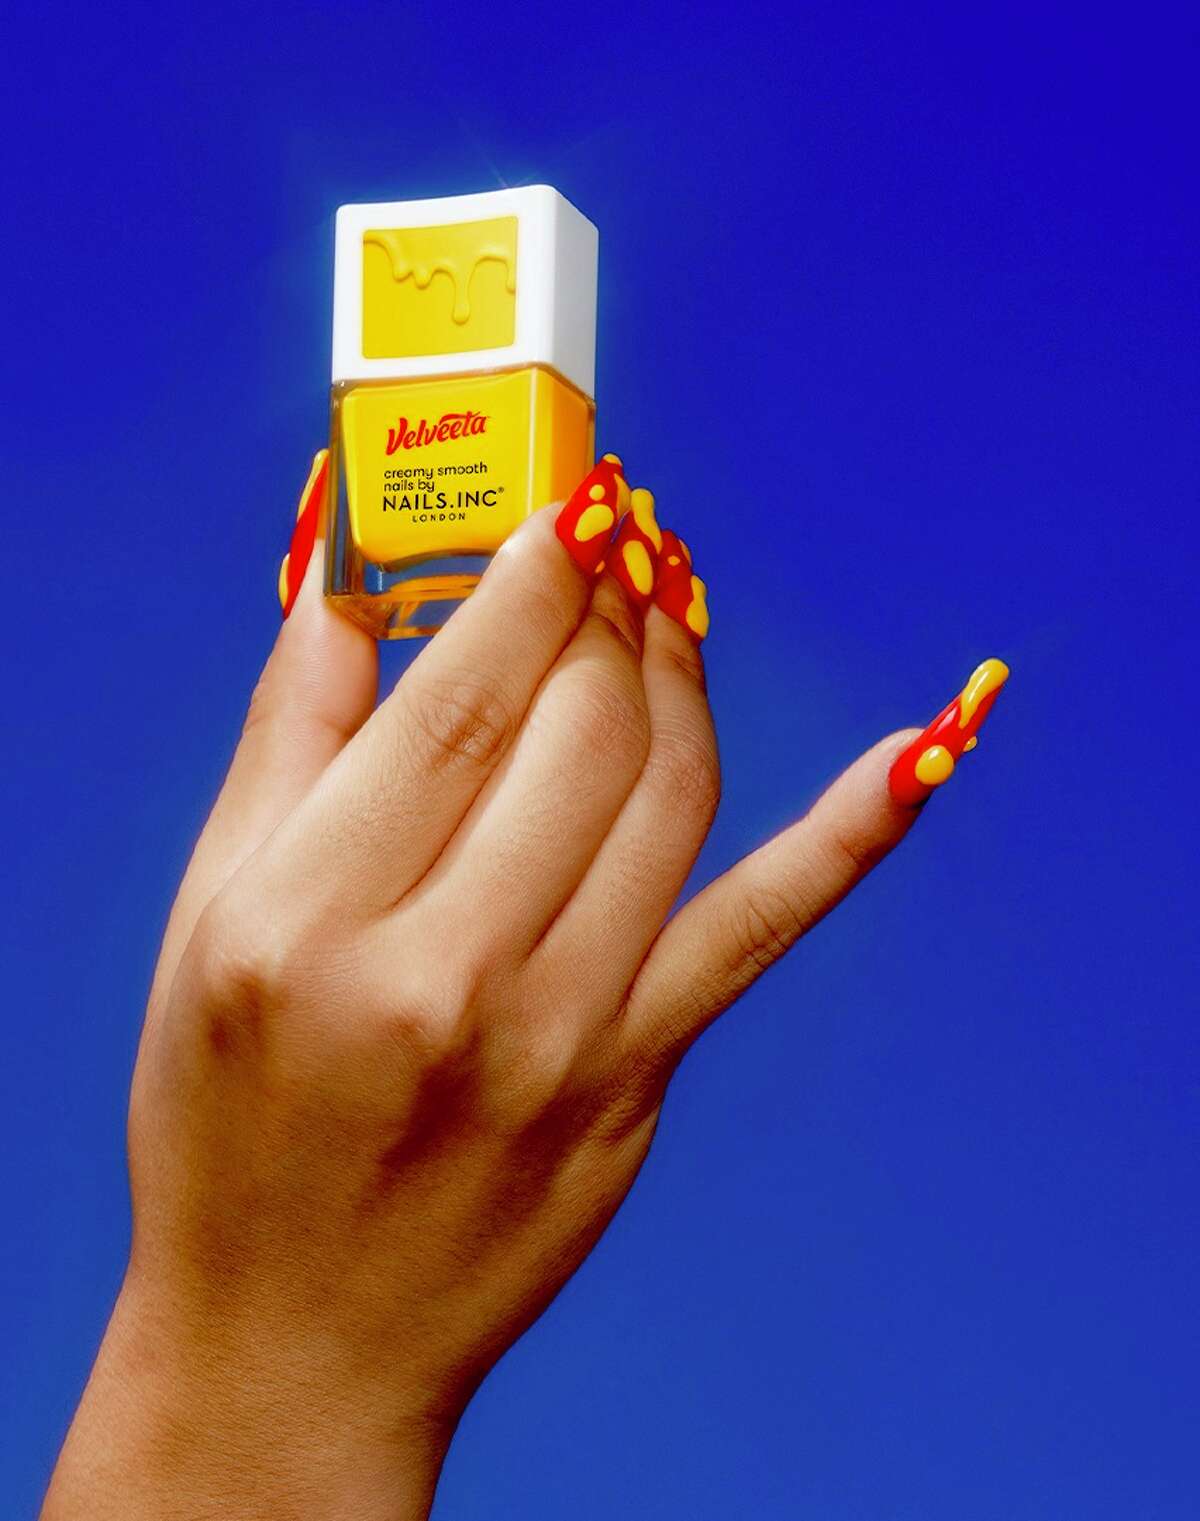 Velveeta has released cheese-scented nail polish available for $15.